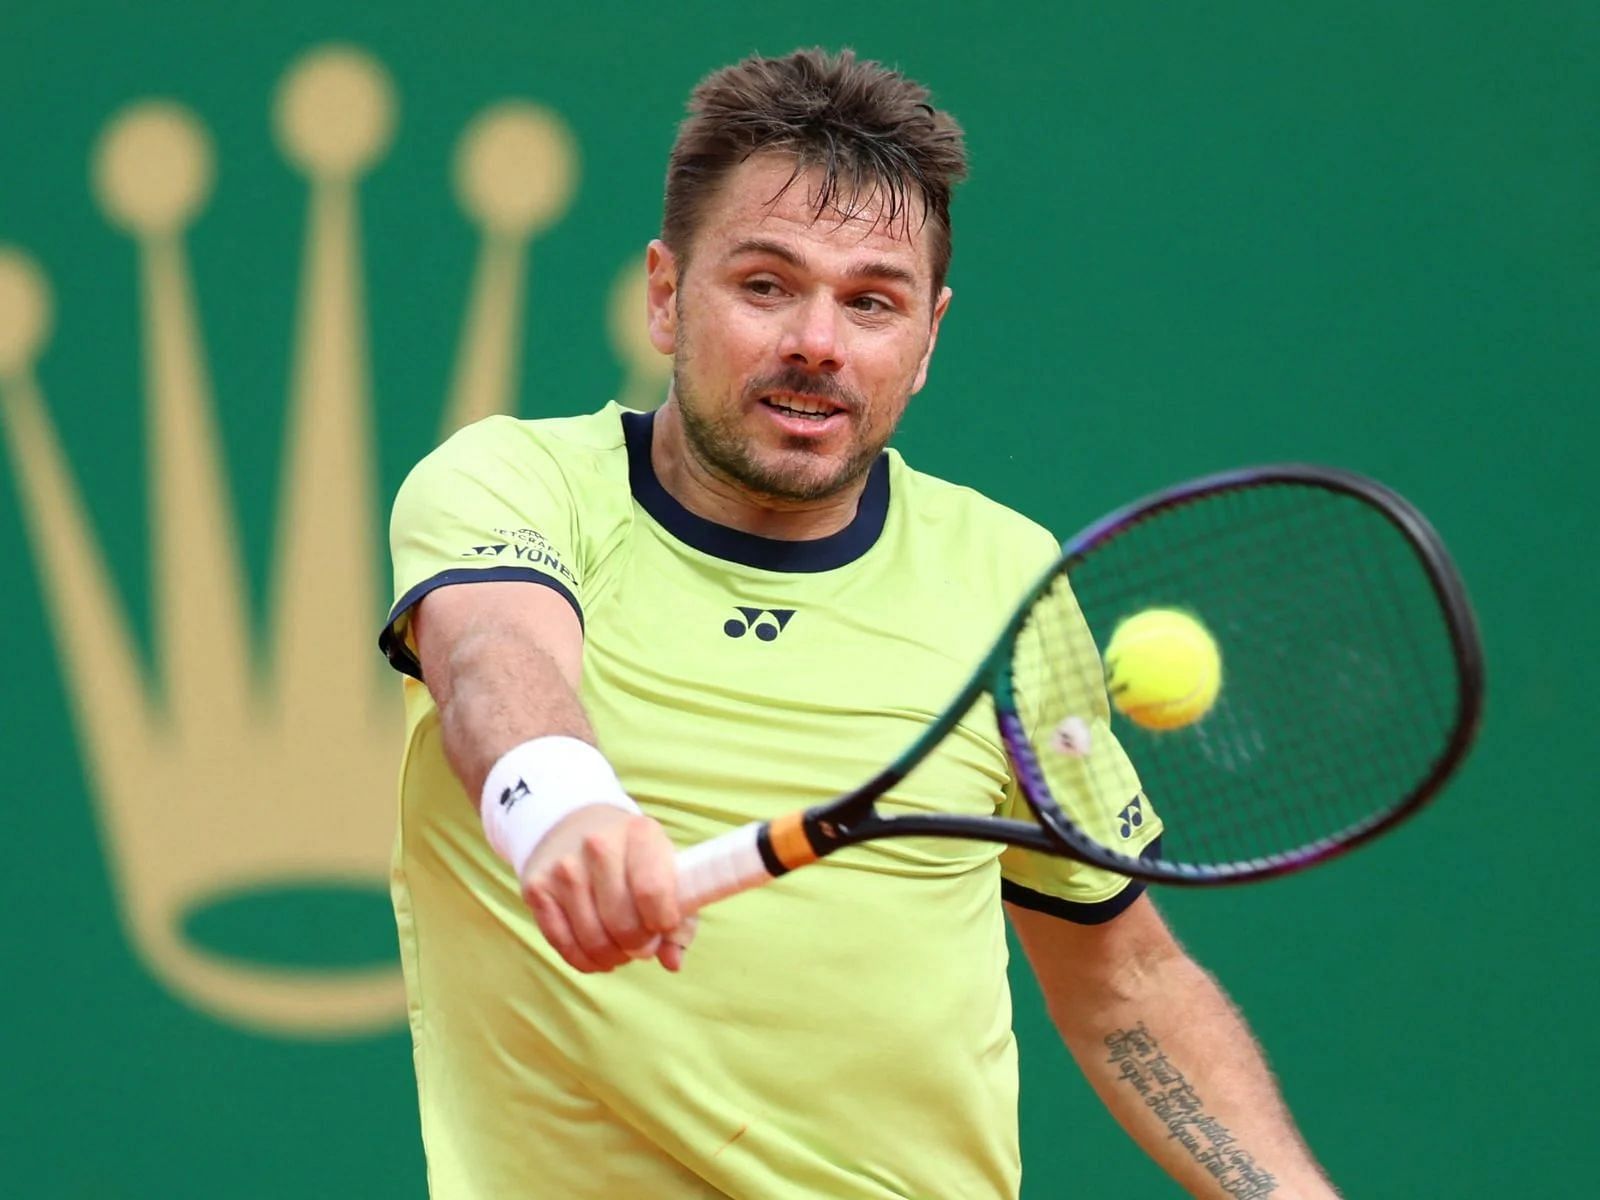 Wawrinka serves poorly in the match